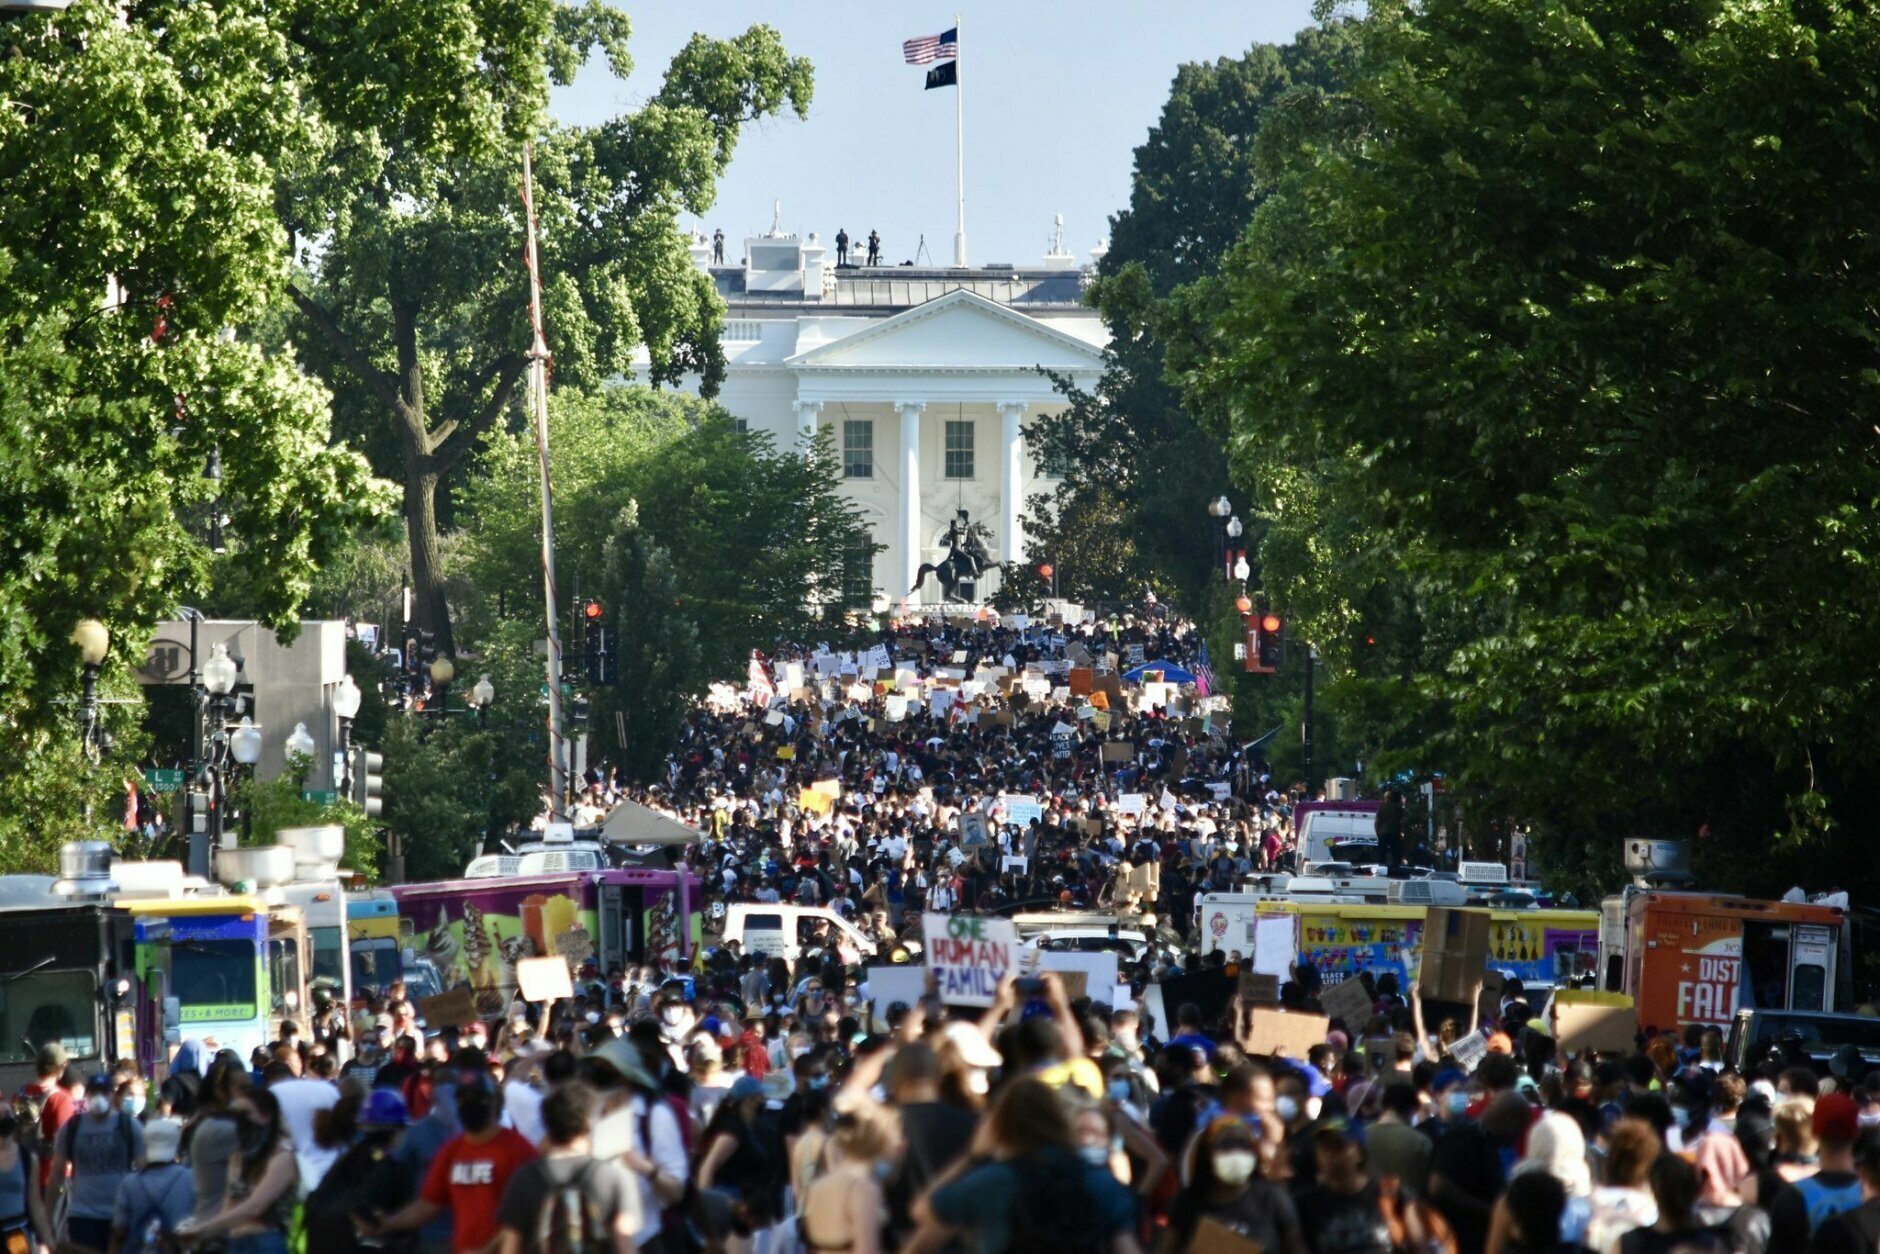 Crowds in front of the White House.